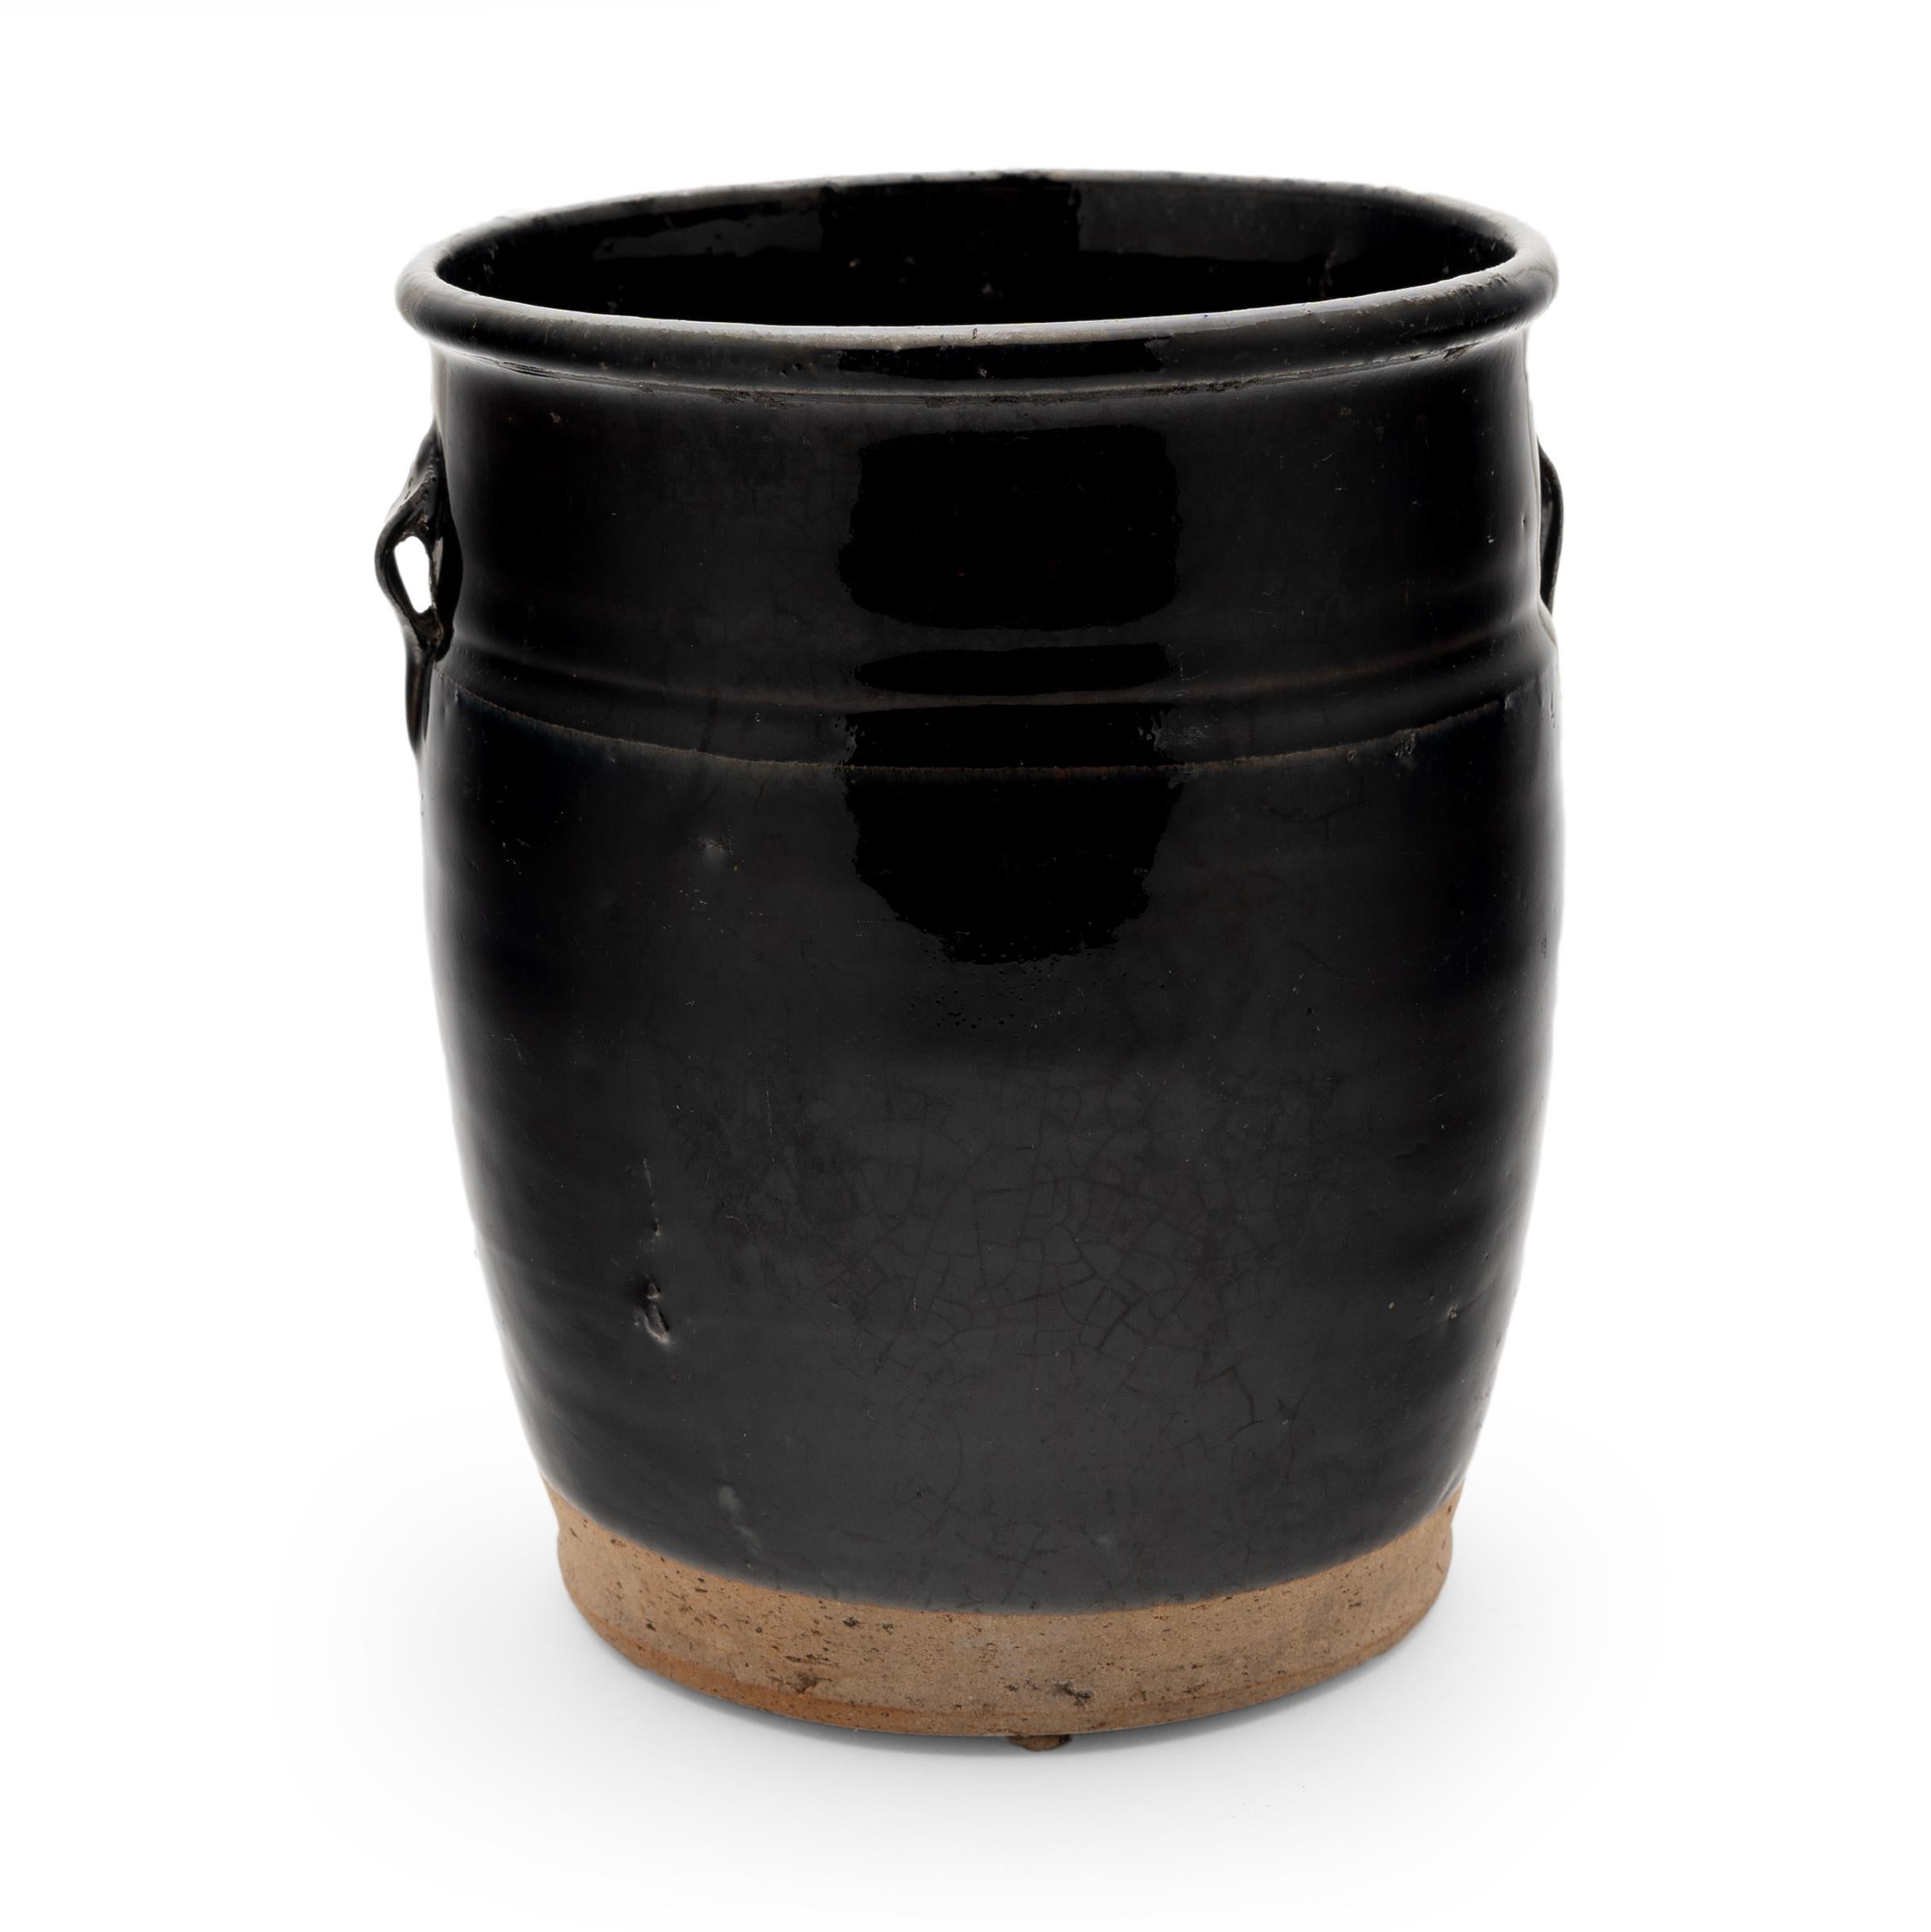 A thick black glaze softly covers the tapered form of this early 20th-century jar, once used daily in a Qing-dynasty kitchen. The petite jar is shaped with gently sloping sides and high shoulders topped by two small strap handles. The lustrous glaze